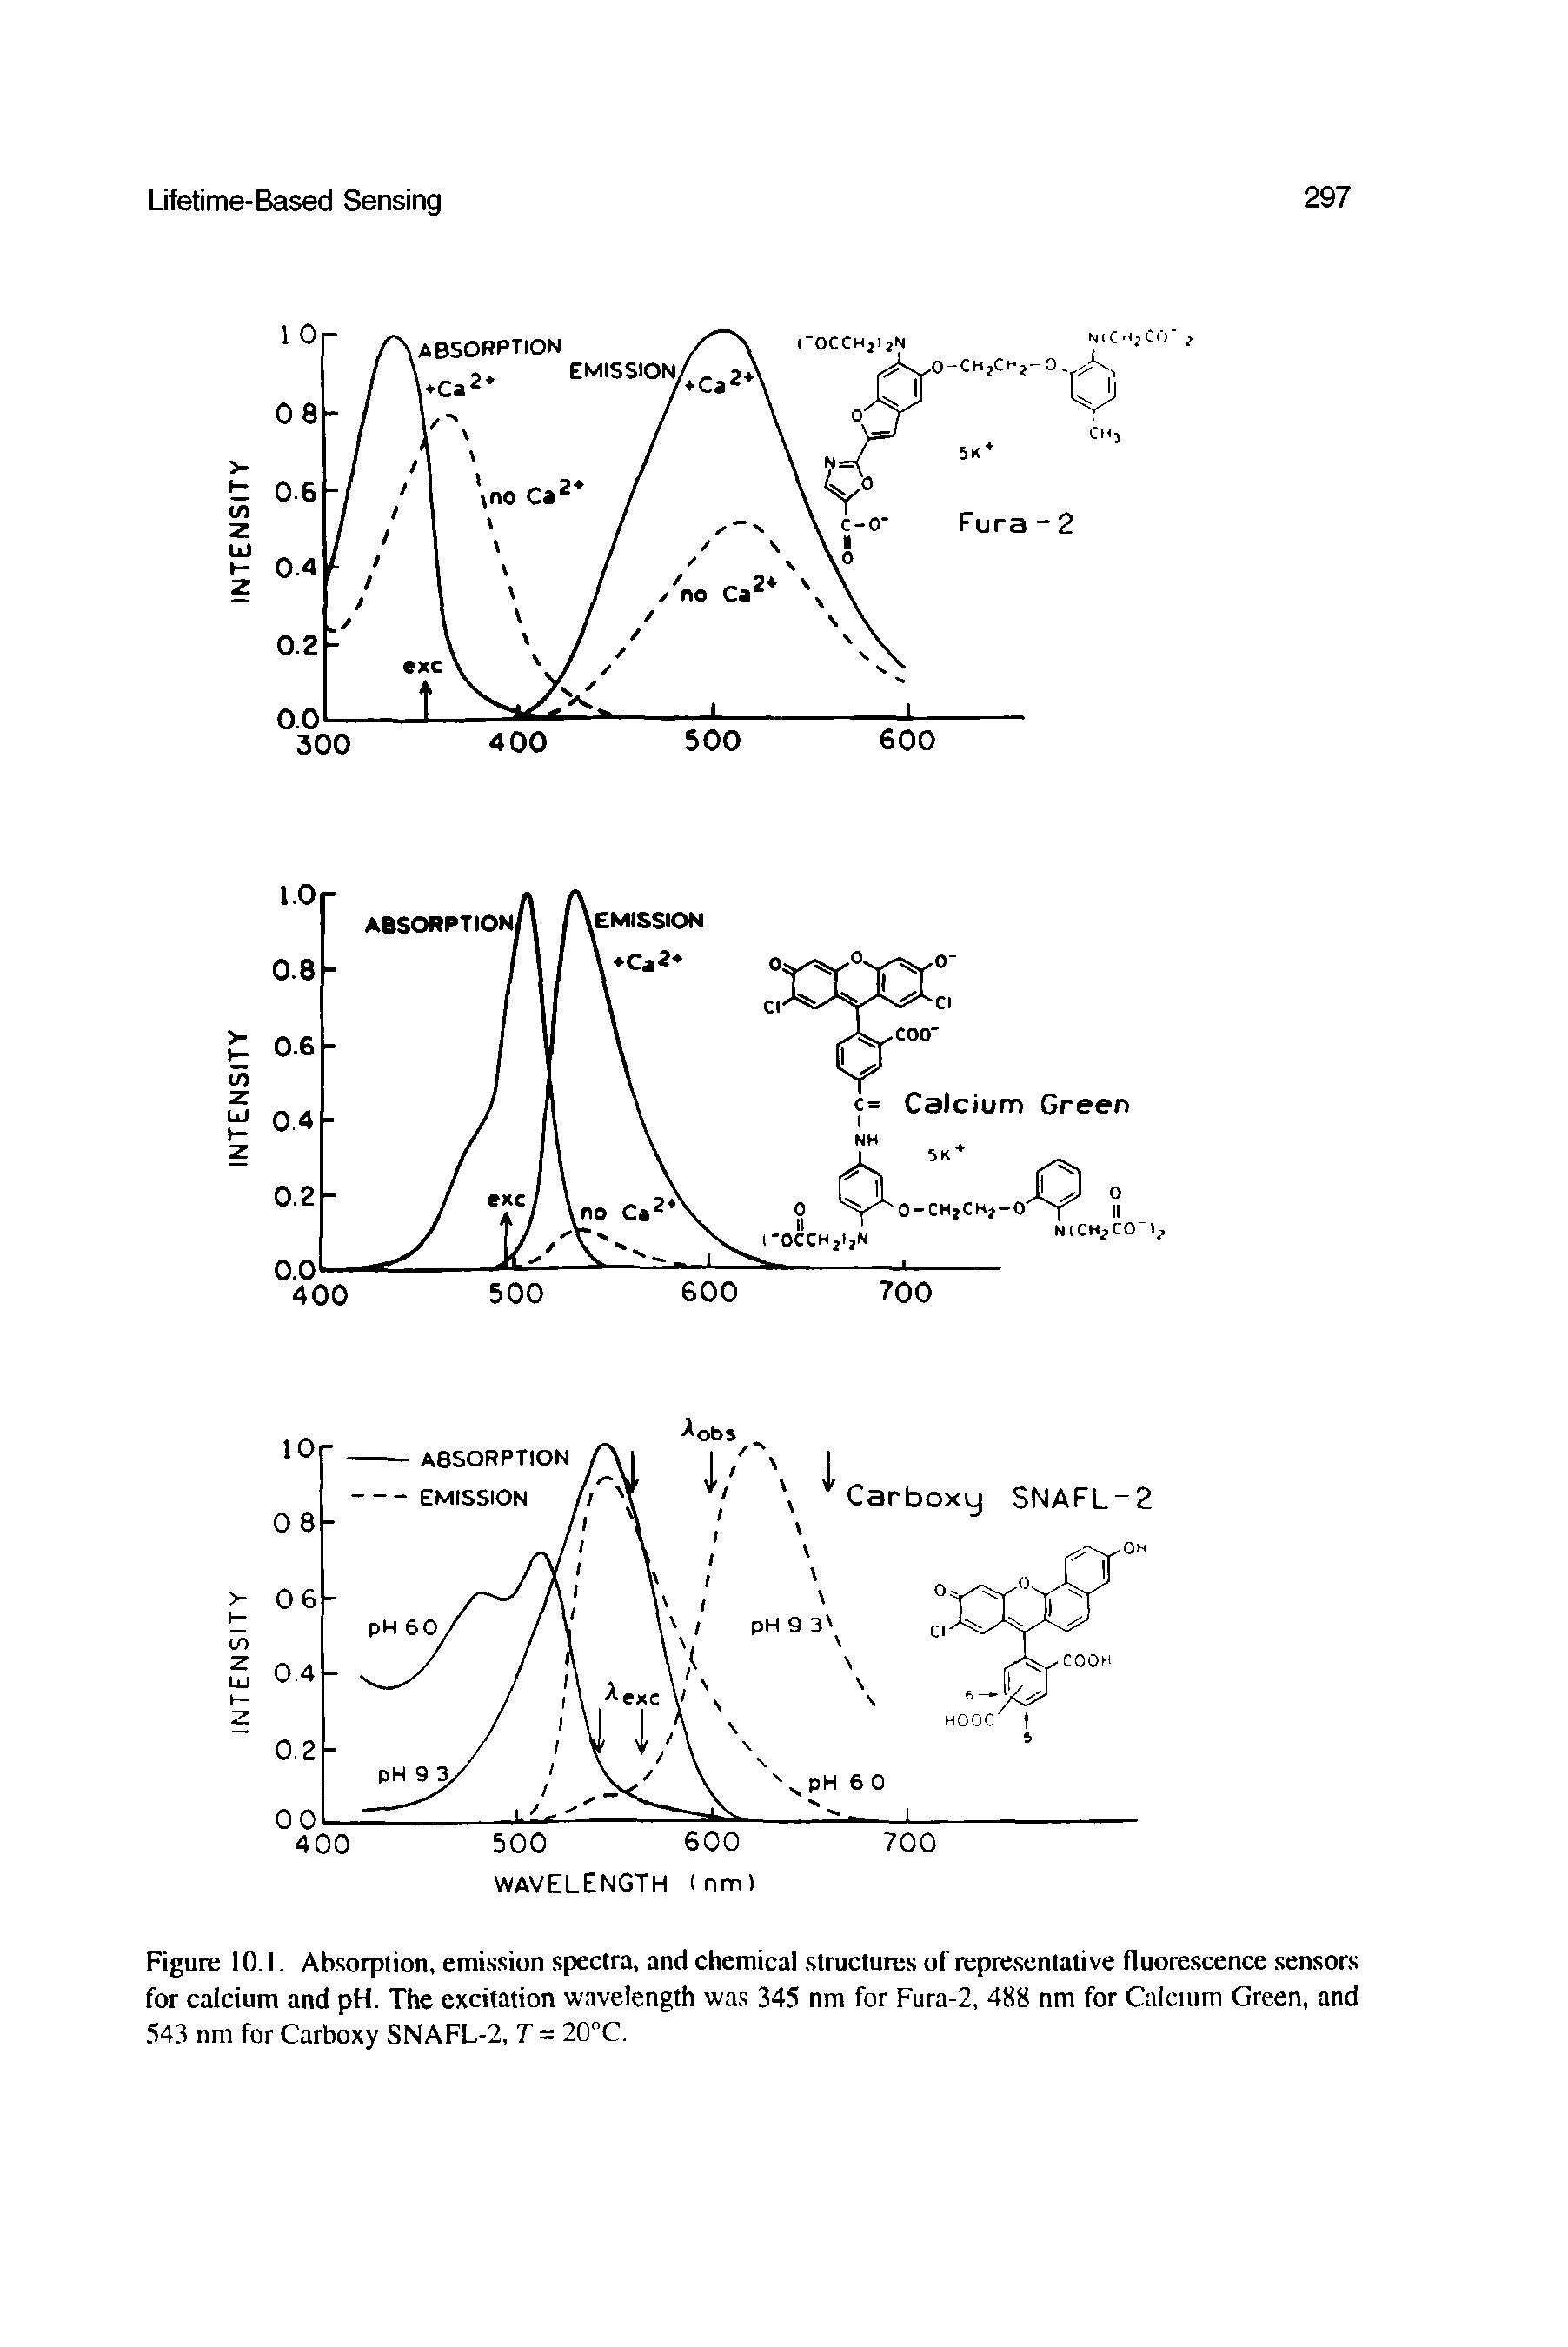 Figure 10.1. Absorption, emission spectra, and chemical structures of representative fluorescence sensors for calcium and pH. The excitation wavelength was 345 nm for Fura-2, 488 nm for Calcium Green, and 543 nm for Carboxy SNAFL-2, T = 20°C.